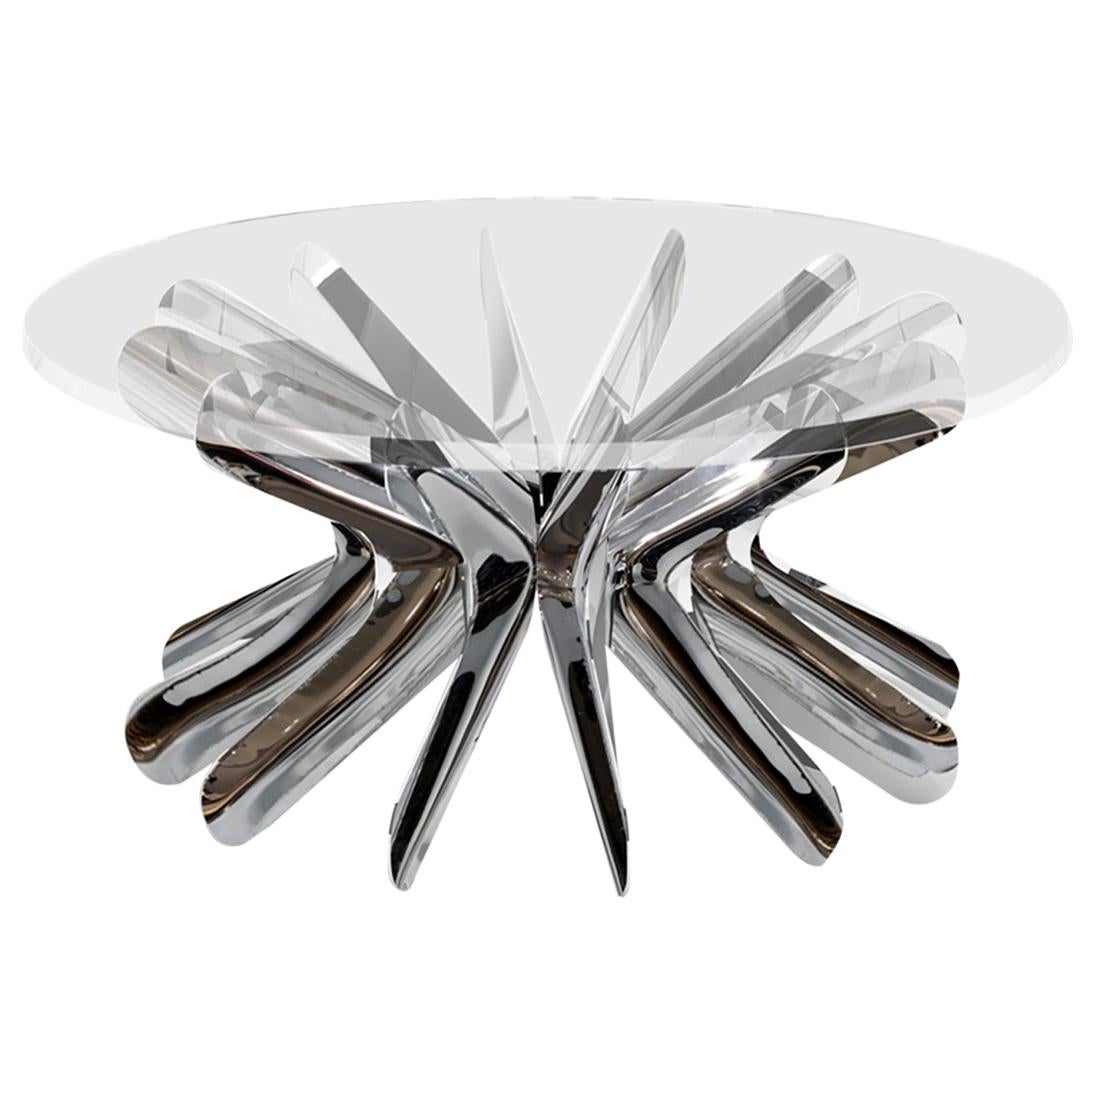 Steel in Rotation No.1 Coffee Tables I Polished Stainless Steel Coffee Table 